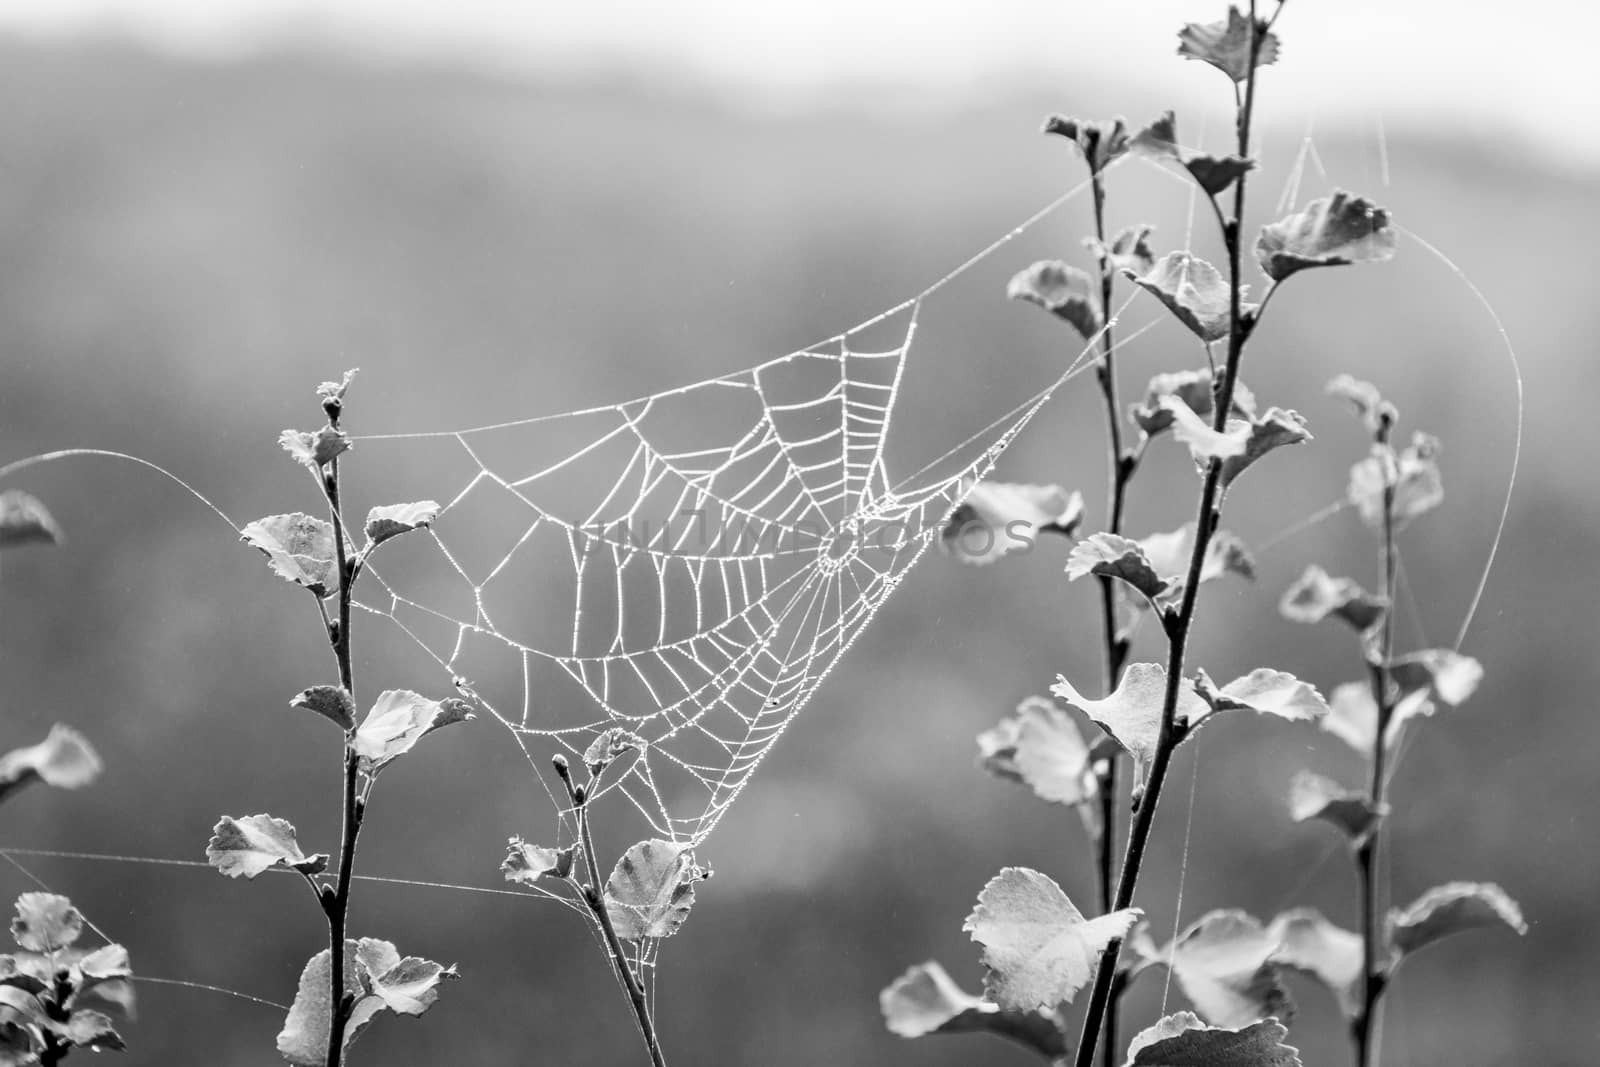 Spider web between small branches covered in small water droplets during foggy weather in black and white by MXW_Stock